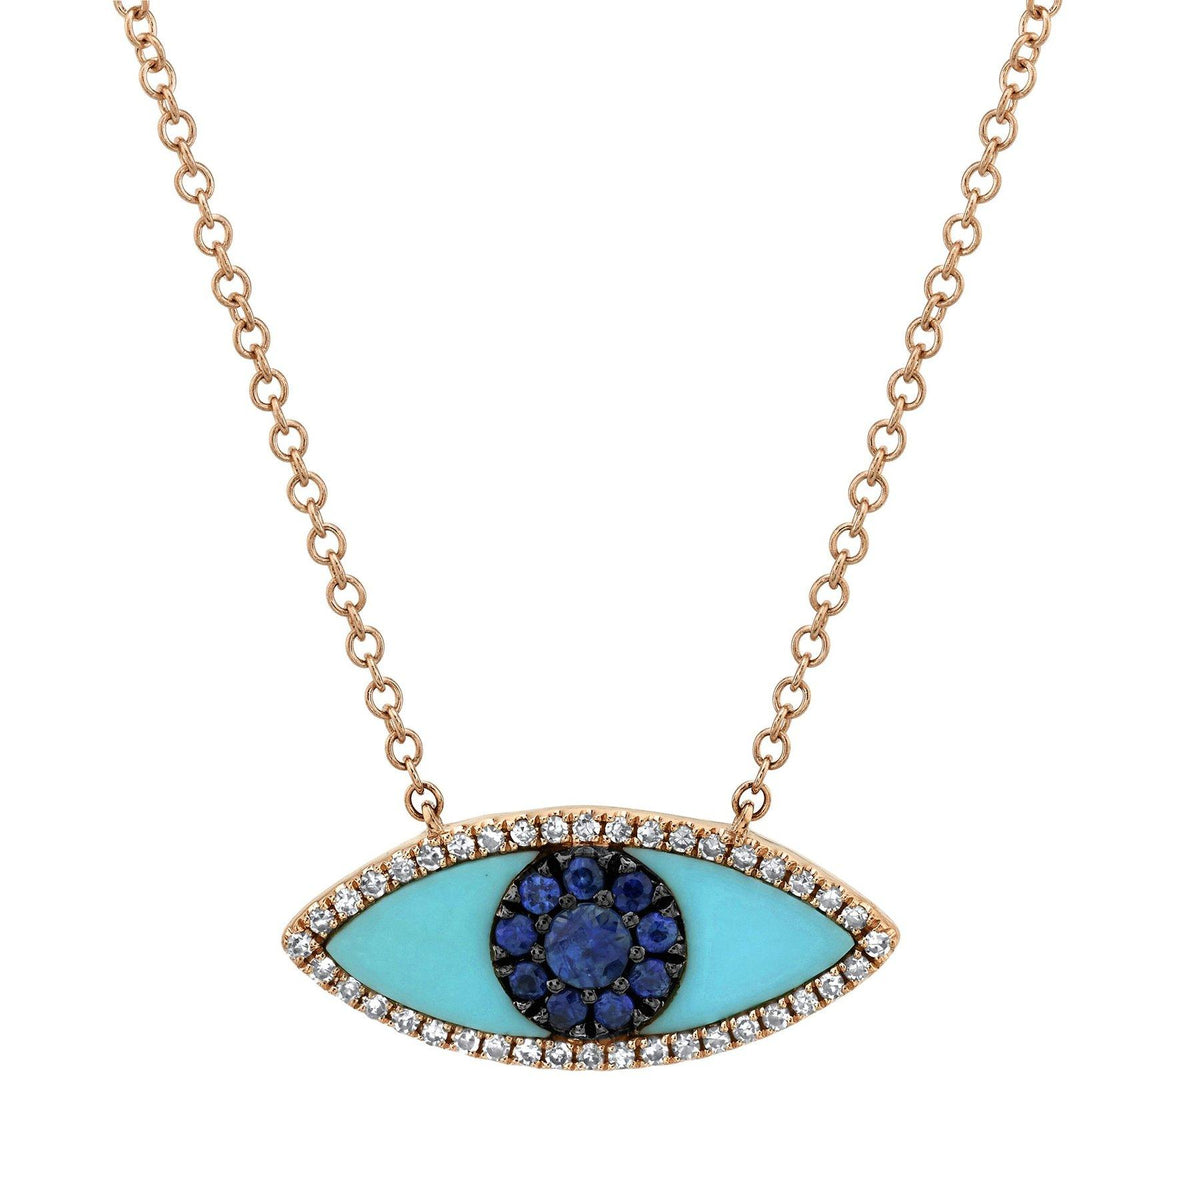 14KT GOLD 0.74 CTW BLUE SAPPHIRE, DIAMOND & COMPOSITE TURQUOISE EYE NECKLACE Rose